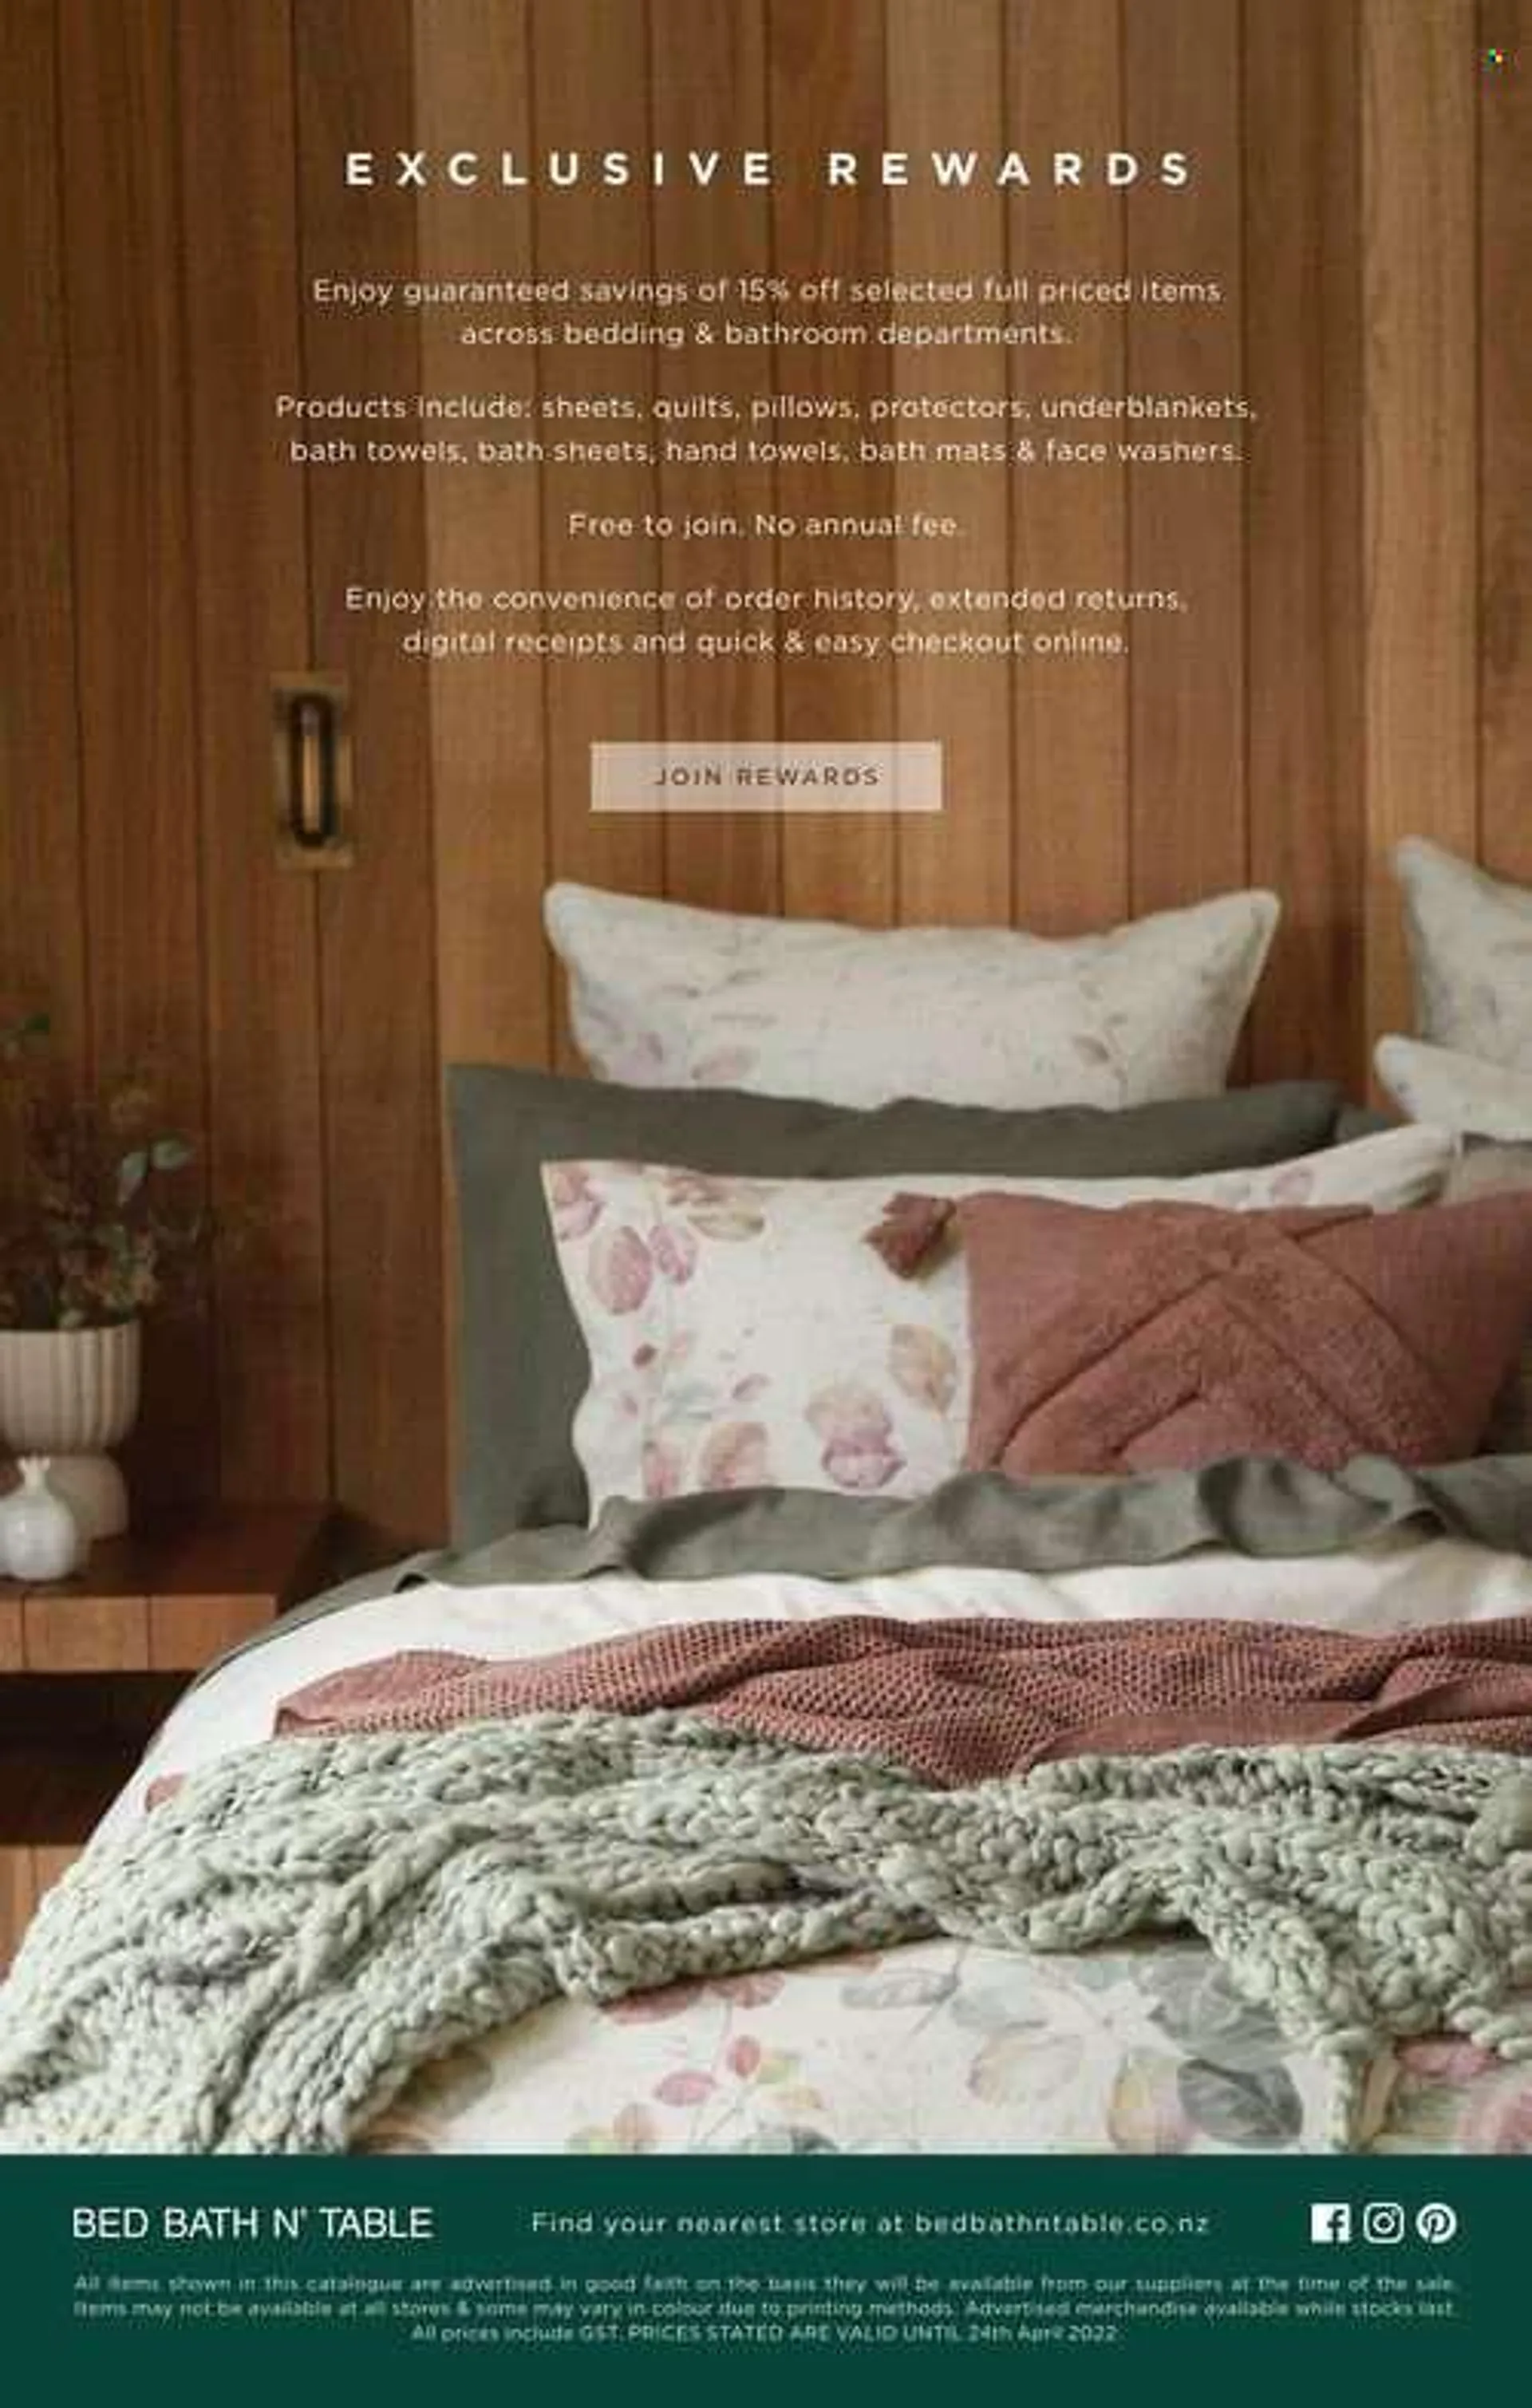 Bed Bath and Table mailer - Sales products - table, bed, bedding, pillow, quilt, bath mat, bath towel, towel, hand towel. Page 54.